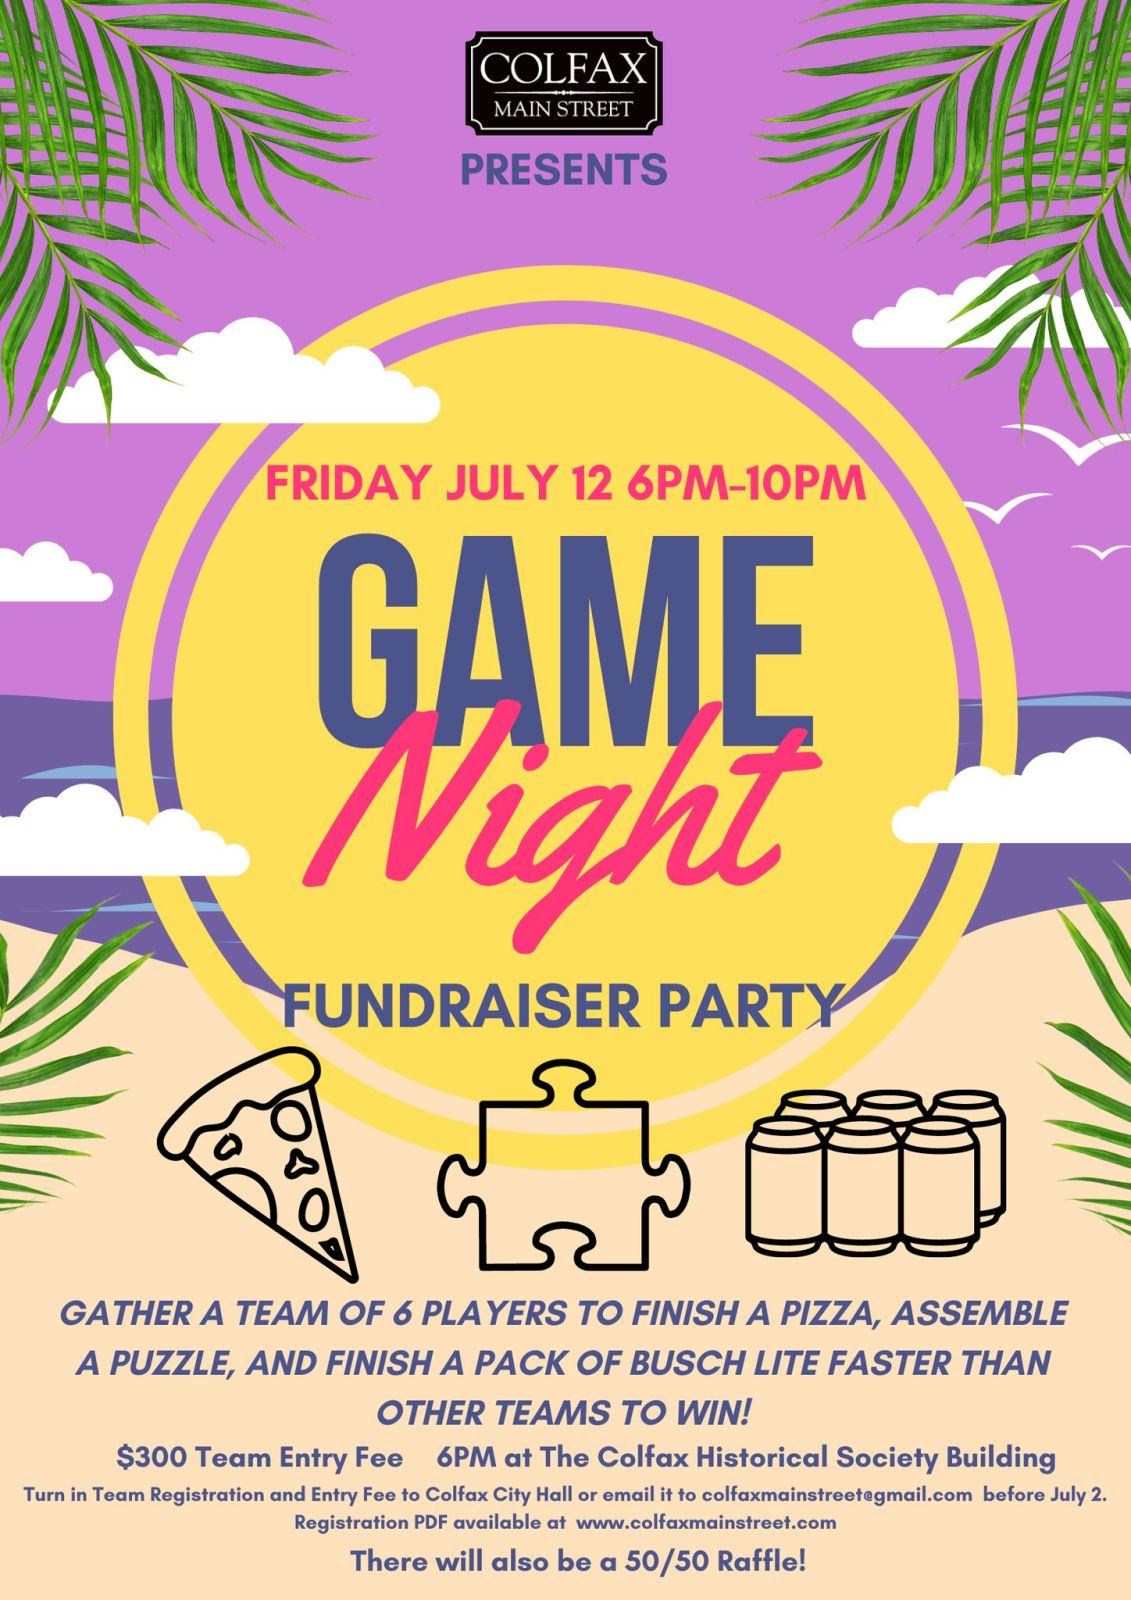 Event Promo Photo For Game Night Fundraiser Party